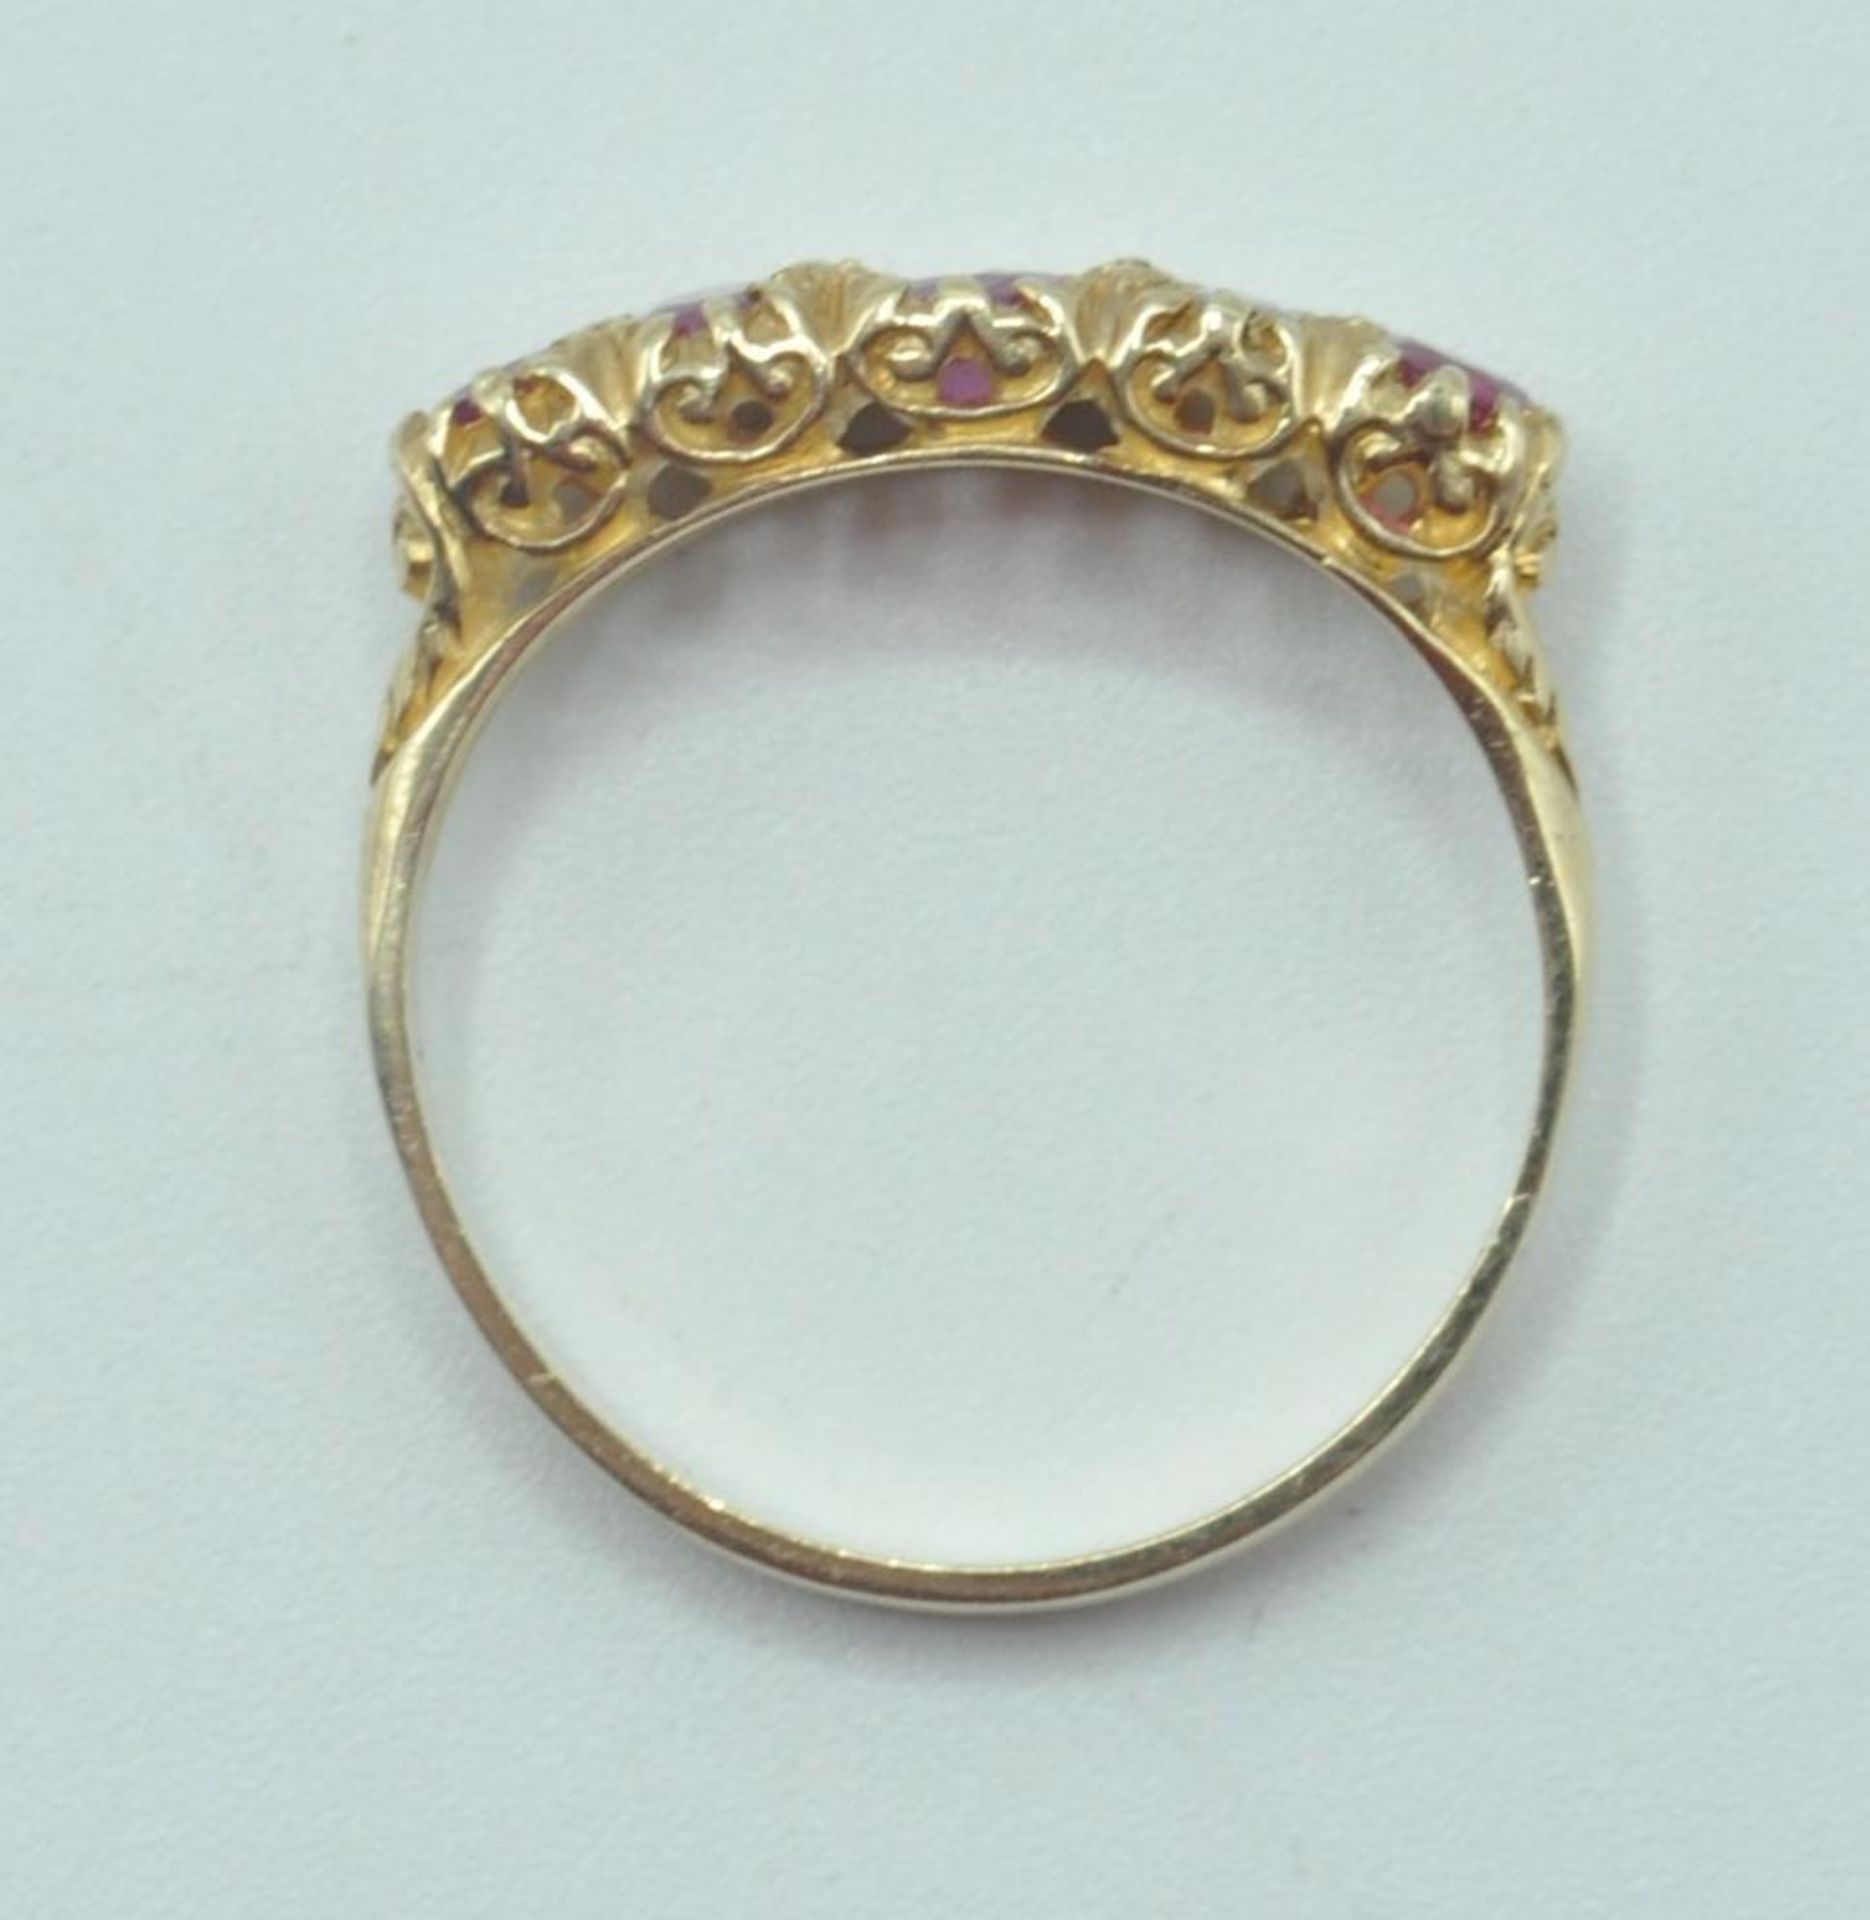 9CT GOLD AND PINK STONE FIVE STONE RING - Image 5 of 6